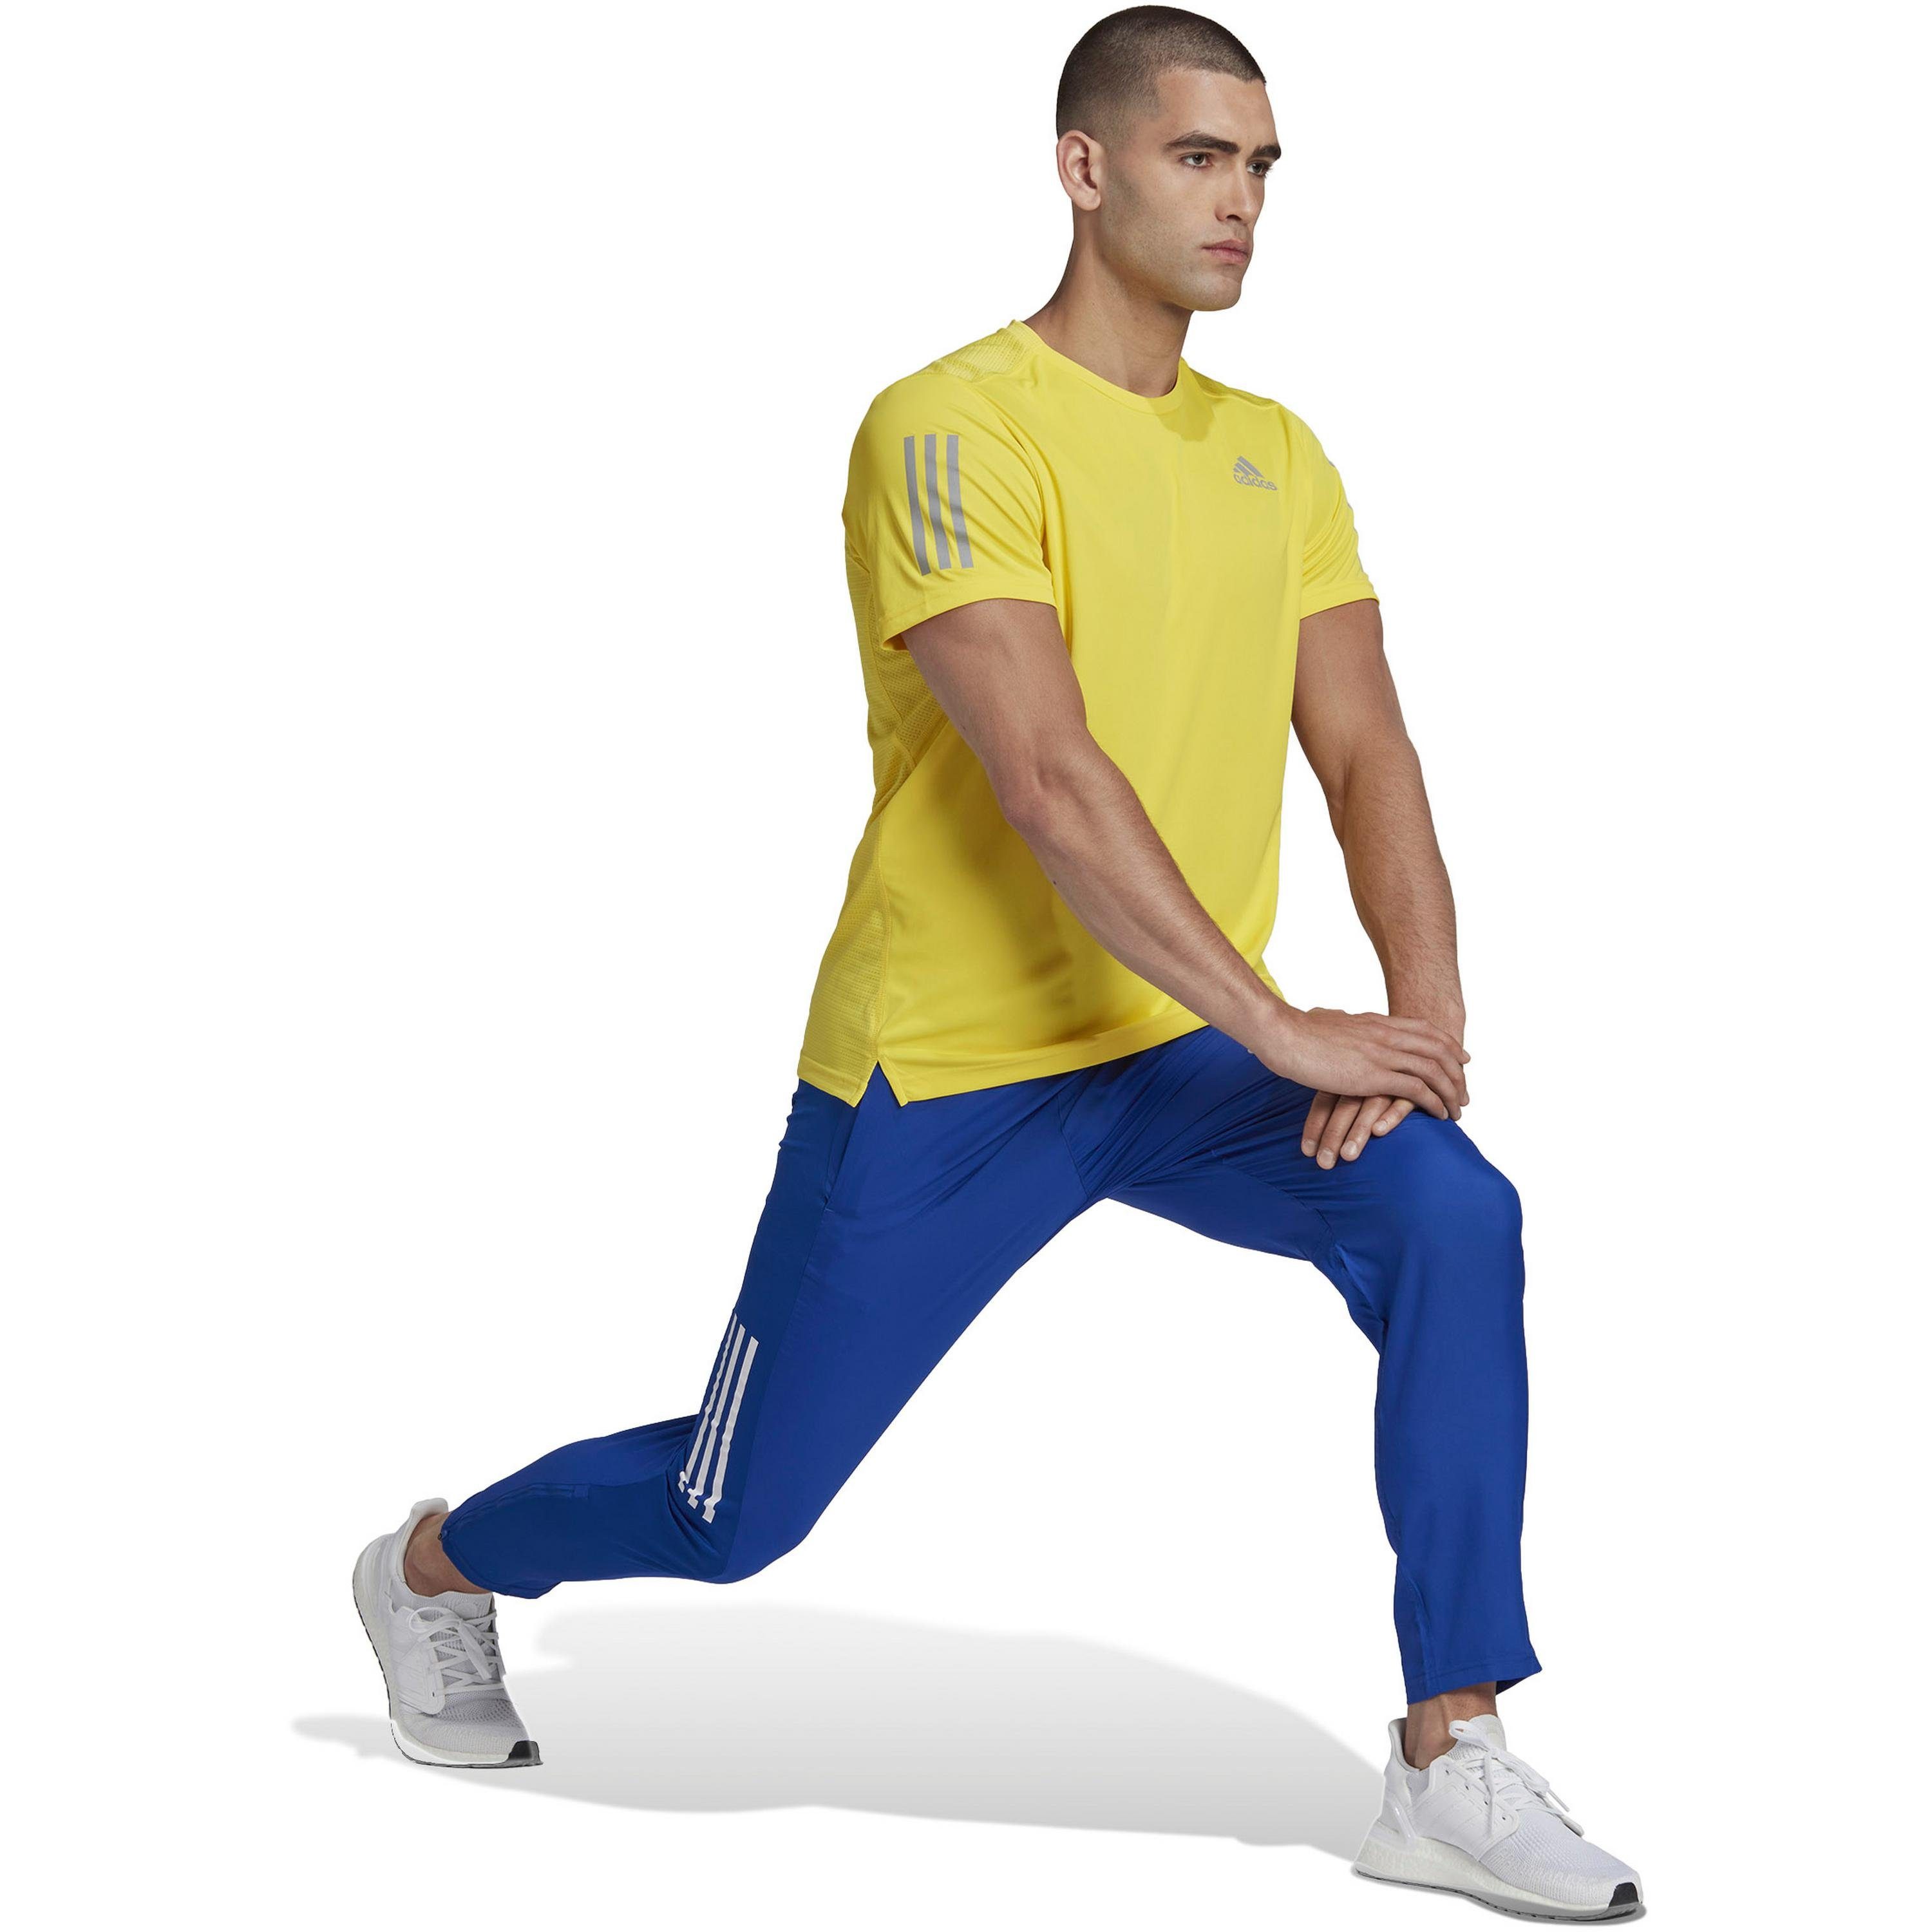 adidas Performance impact THE yellow OWN RUN Funktionsshirt